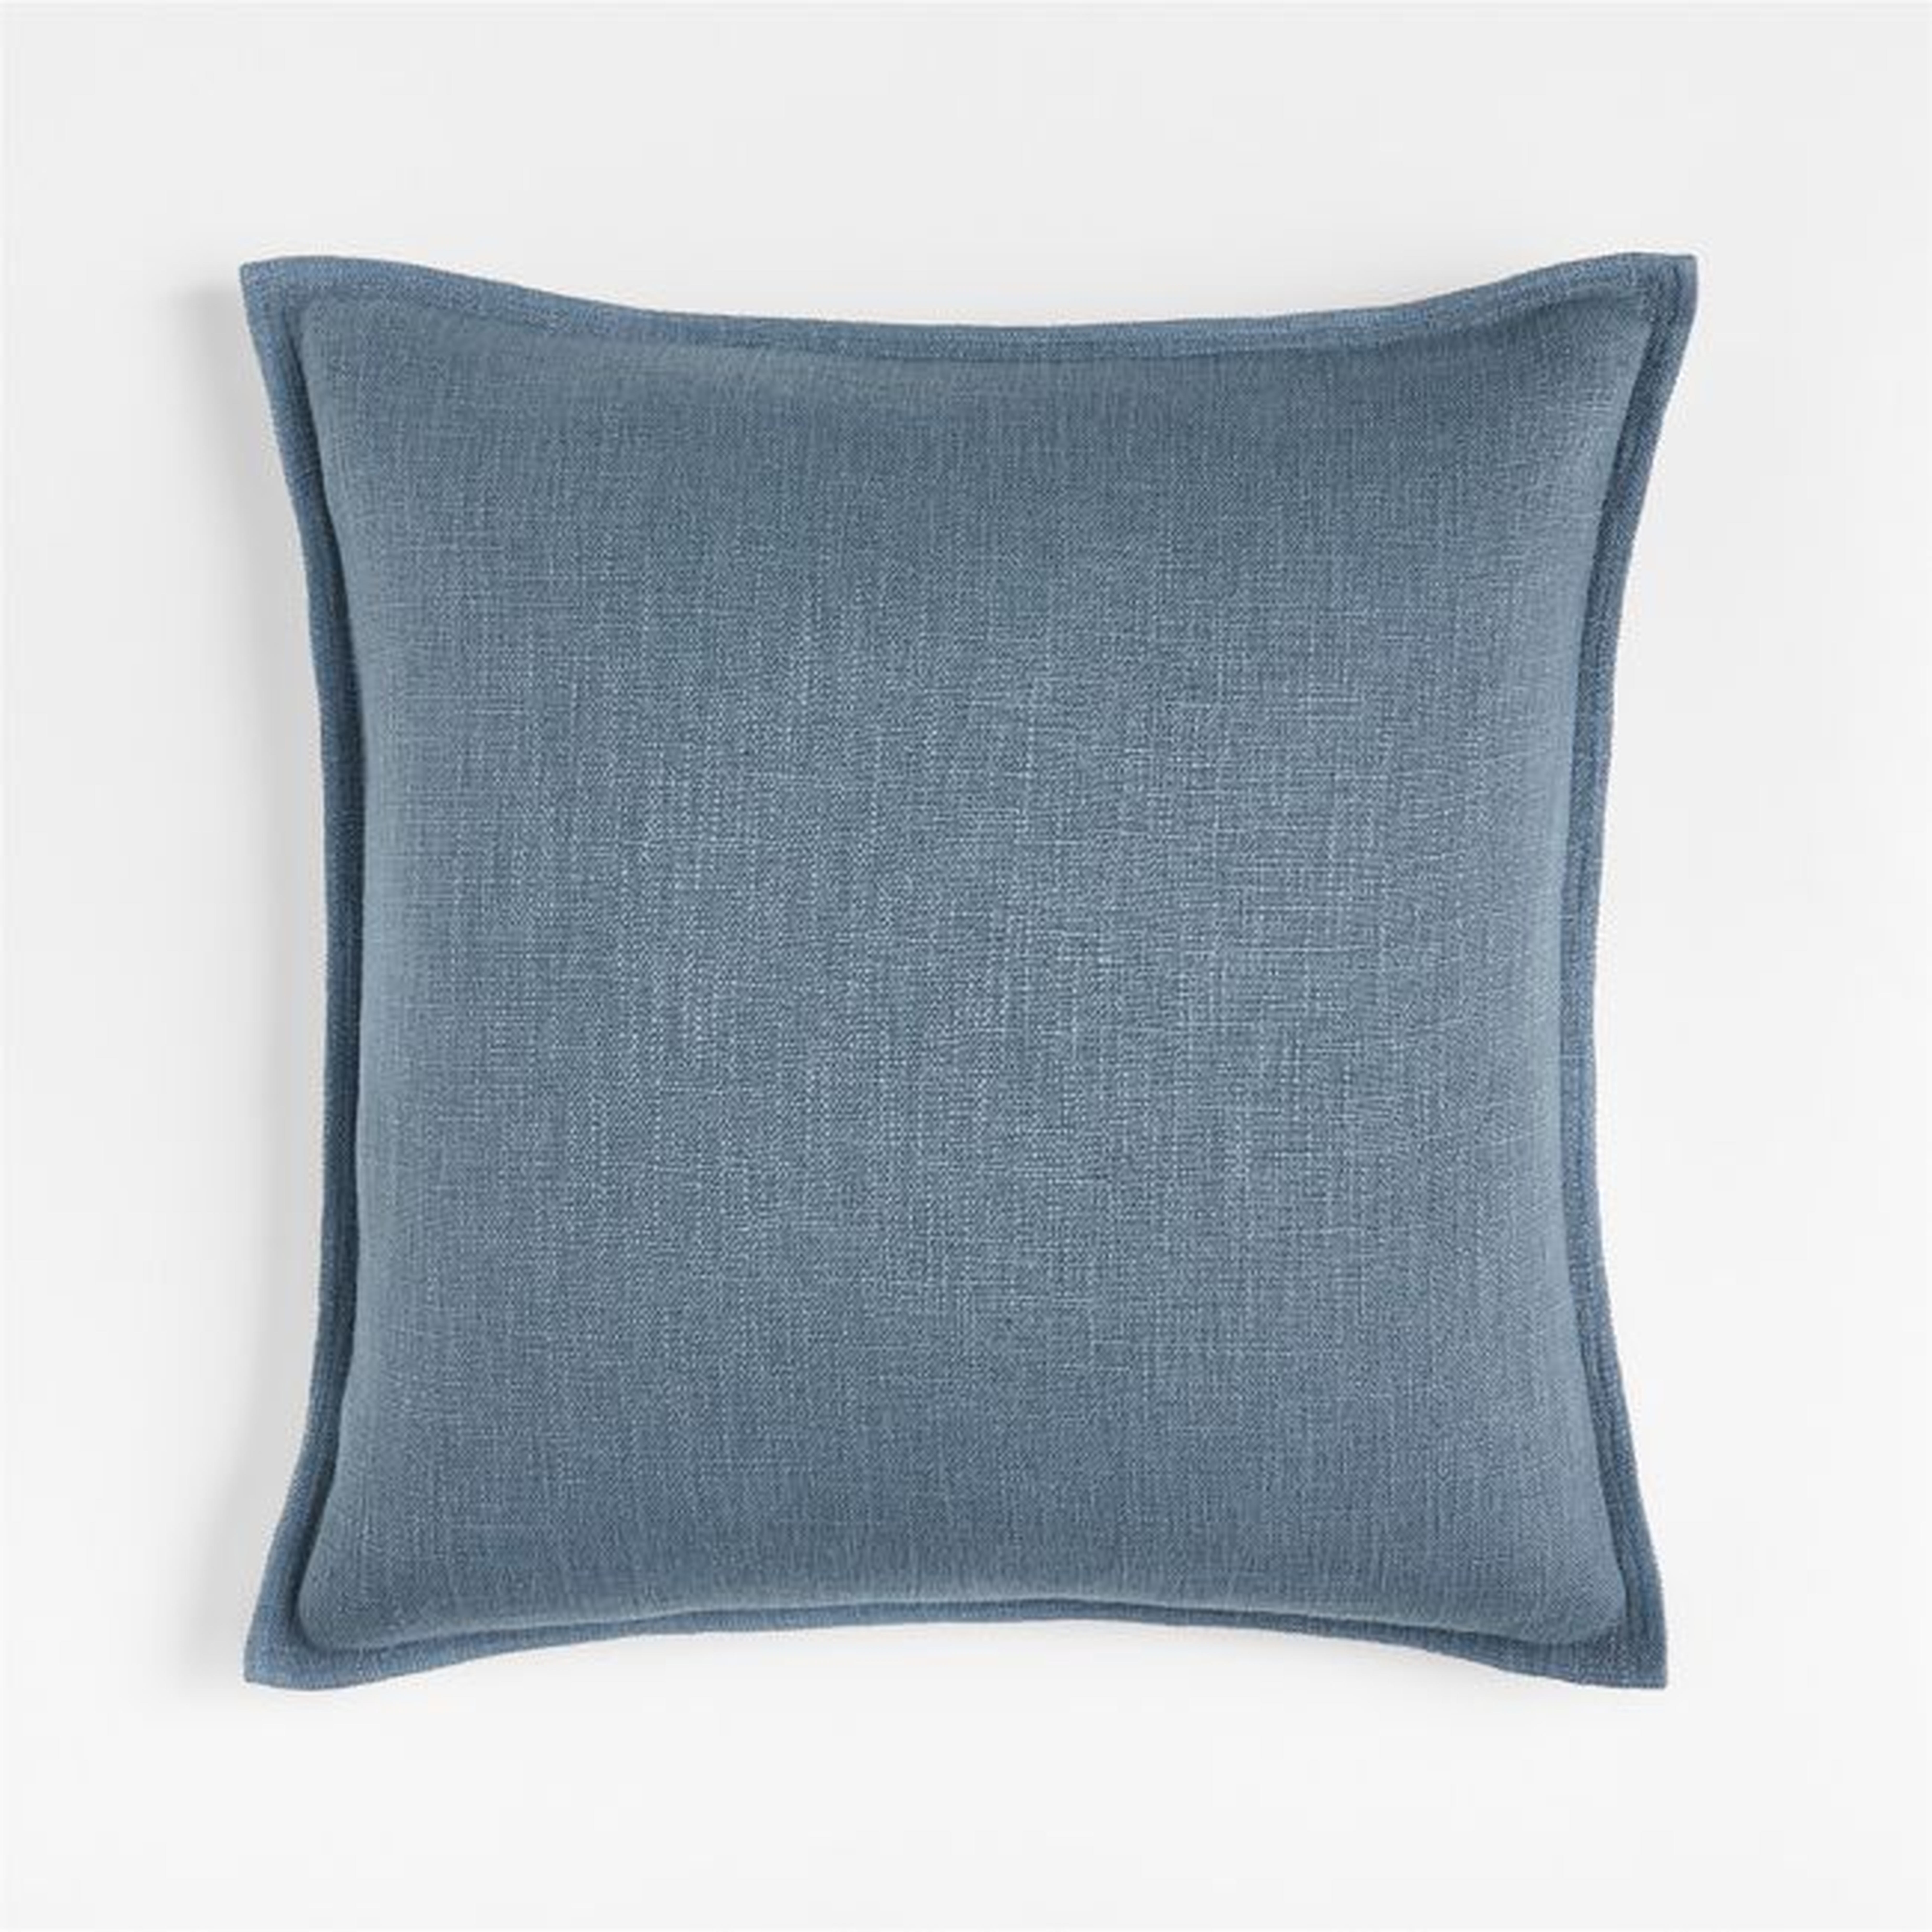 Blue 20"x20" Laundered Linen Throw Pillow with Down-Alternative Insert - Crate and Barrel